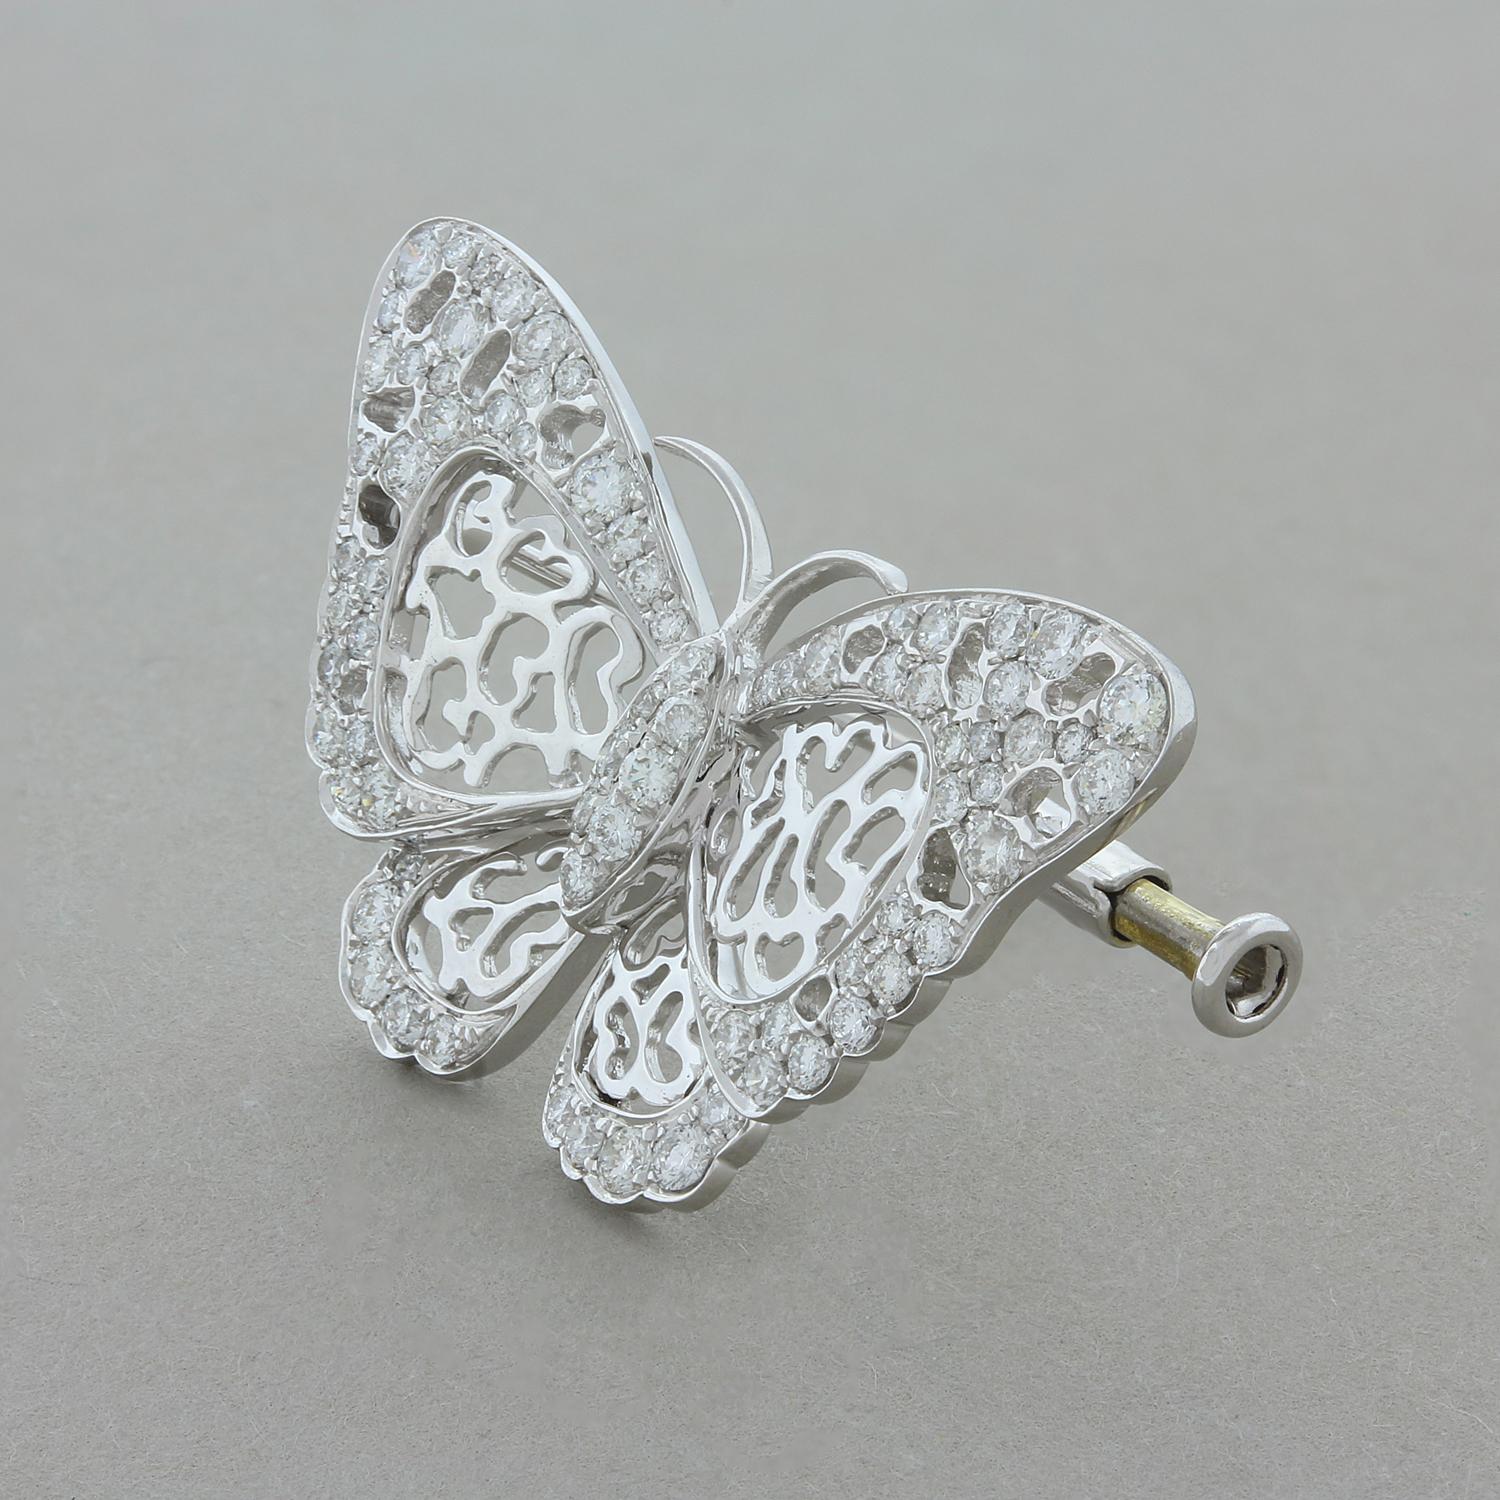 This everyday butterfly brooch features 0.86 carats of VS quality round cut diamonds. The flying butterfly is set in 18K white gold with lace wings for a soft finish. Can be worn on a shirt or jacket.  

Brooch Length: 0.75 inches
Brooch Width: 1.25